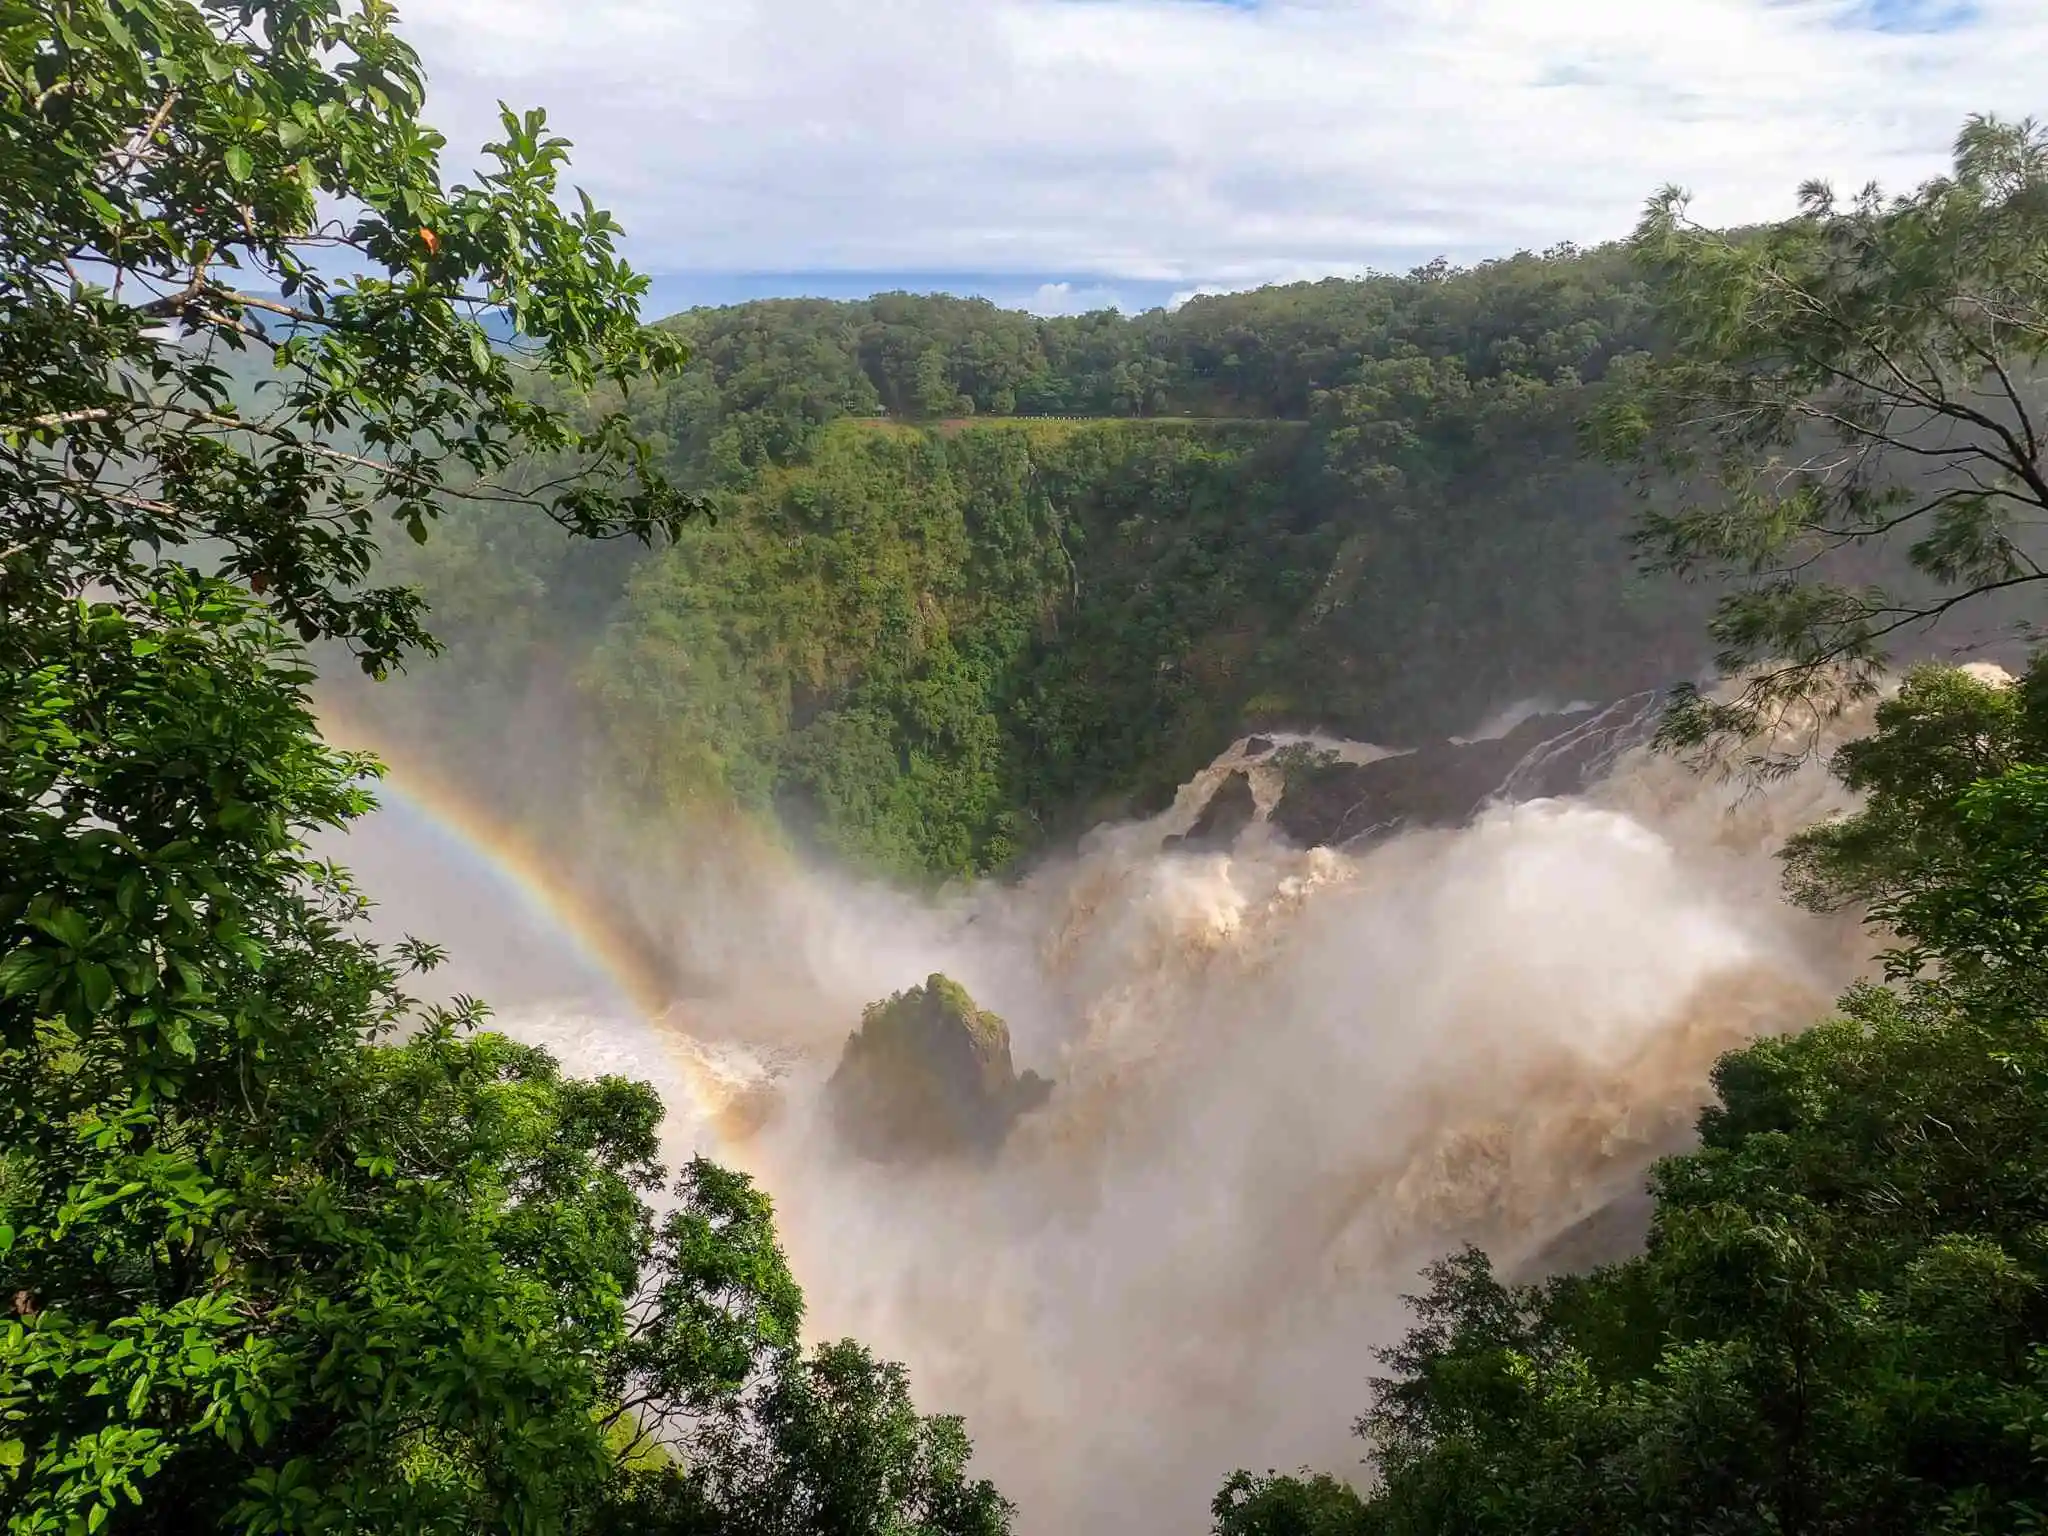 Impressive rainbow formations in a shroud of mist as the Barron Falls flows into the deep gorge.